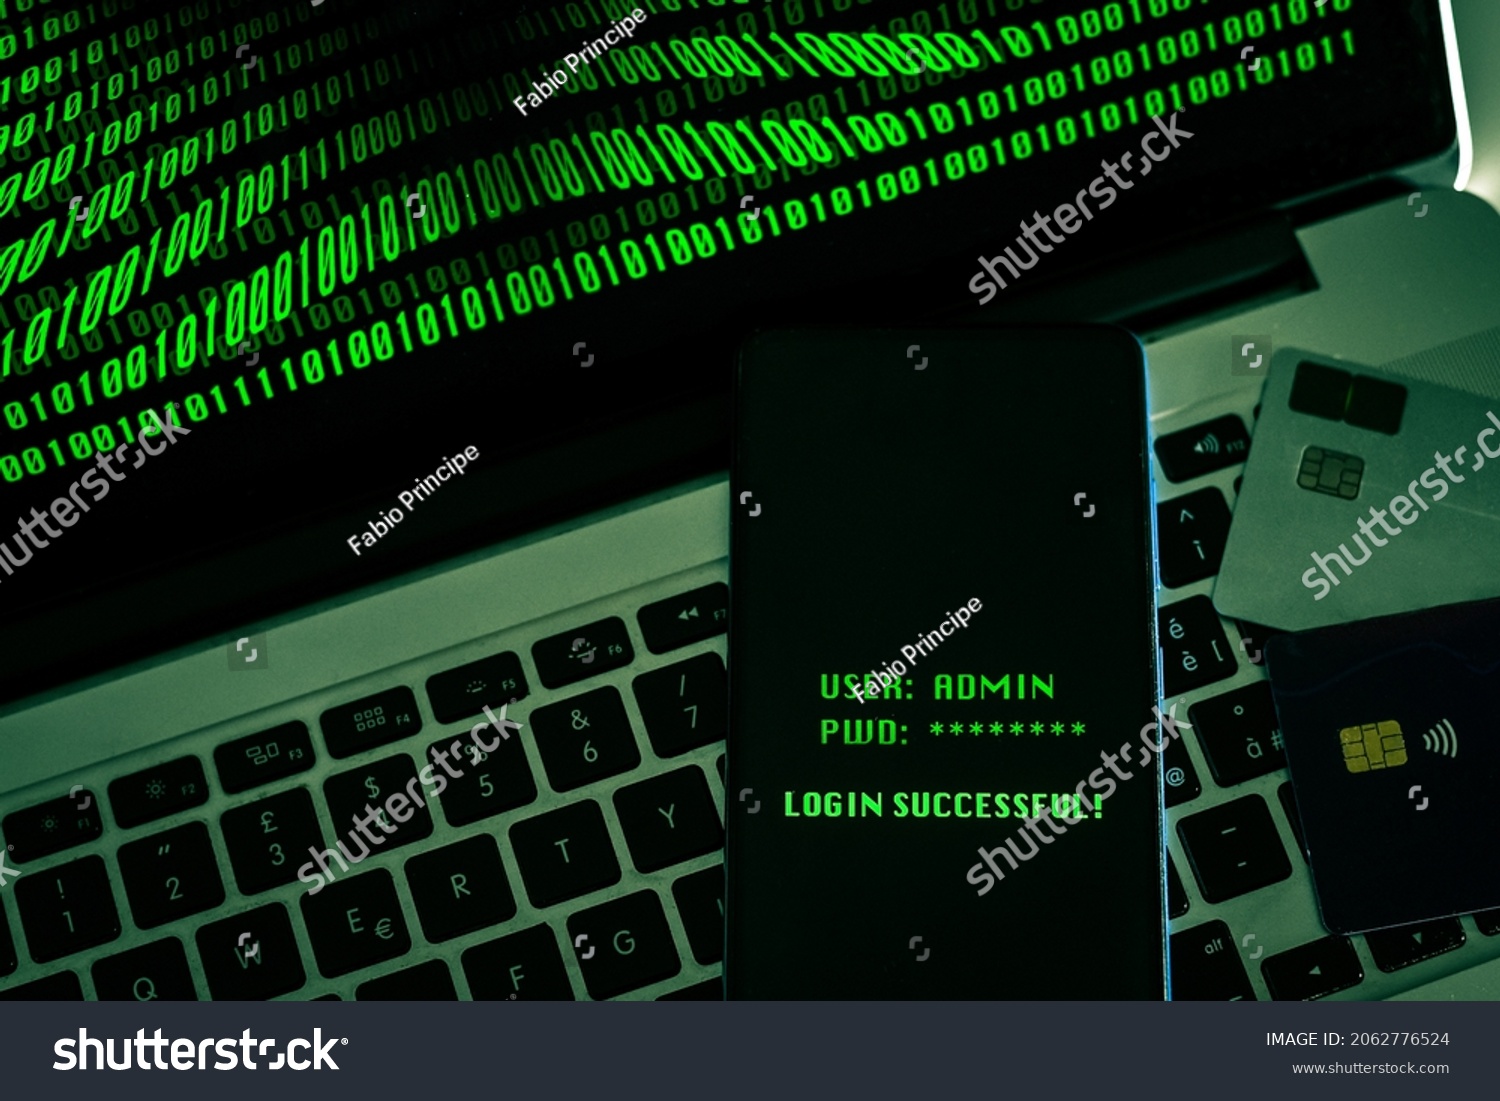 Laptop with green numbers on display. Credit cards, smartphone displaying successful login with credentials user and password. Remote banking technology, security privacy, hacker, cyber crime concept #2062776524